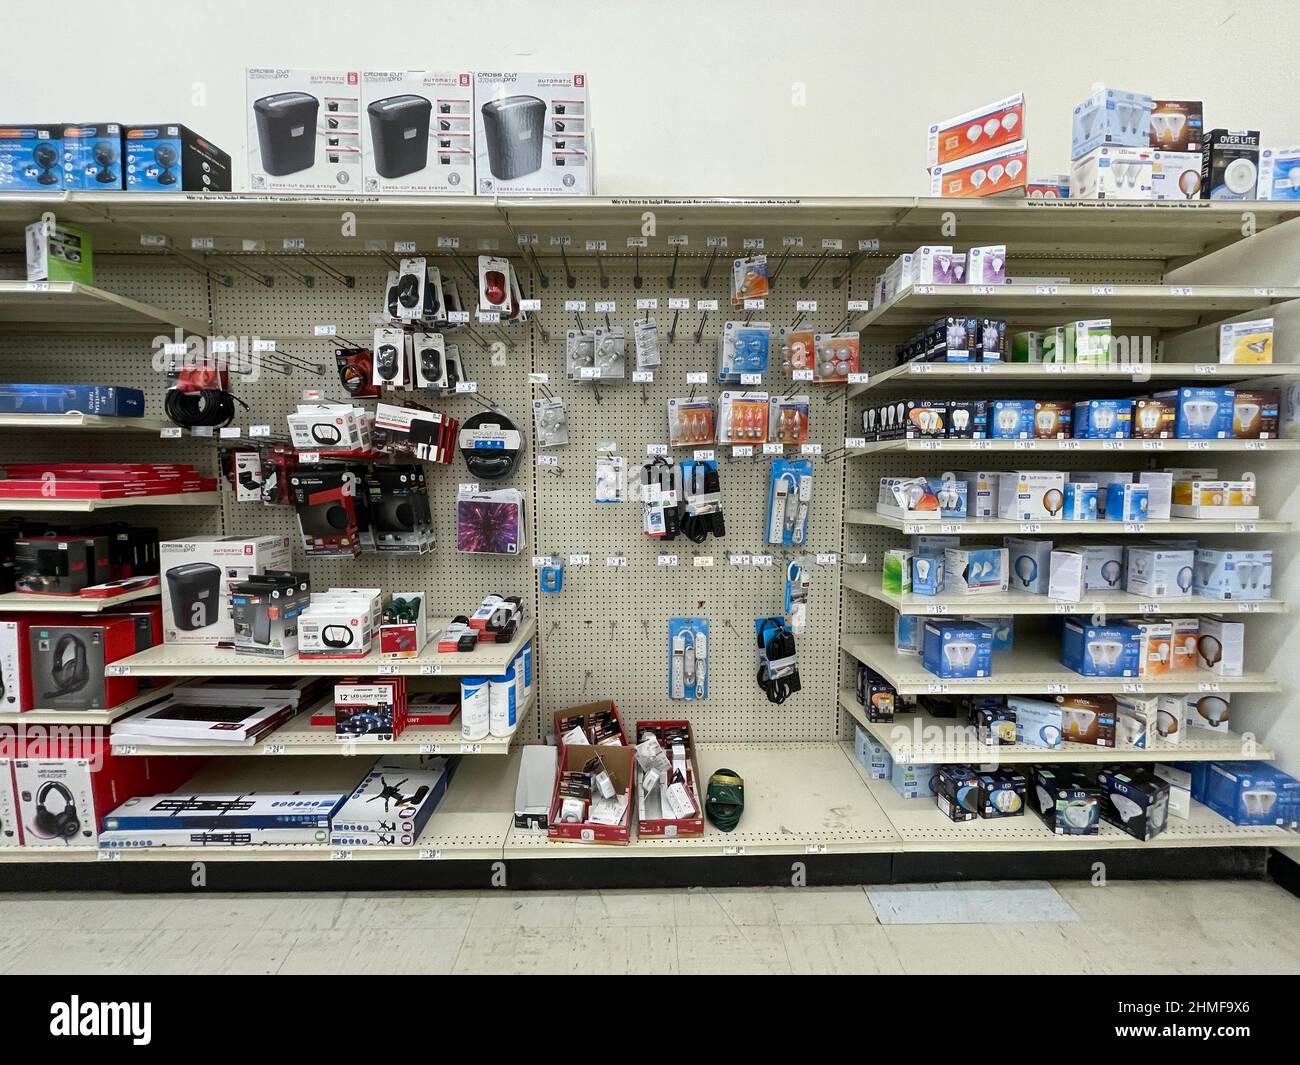 Augusta, Ga USA - 12 09 21: Big Lots retail store interior Hwy 25 household electrical Stock Photo